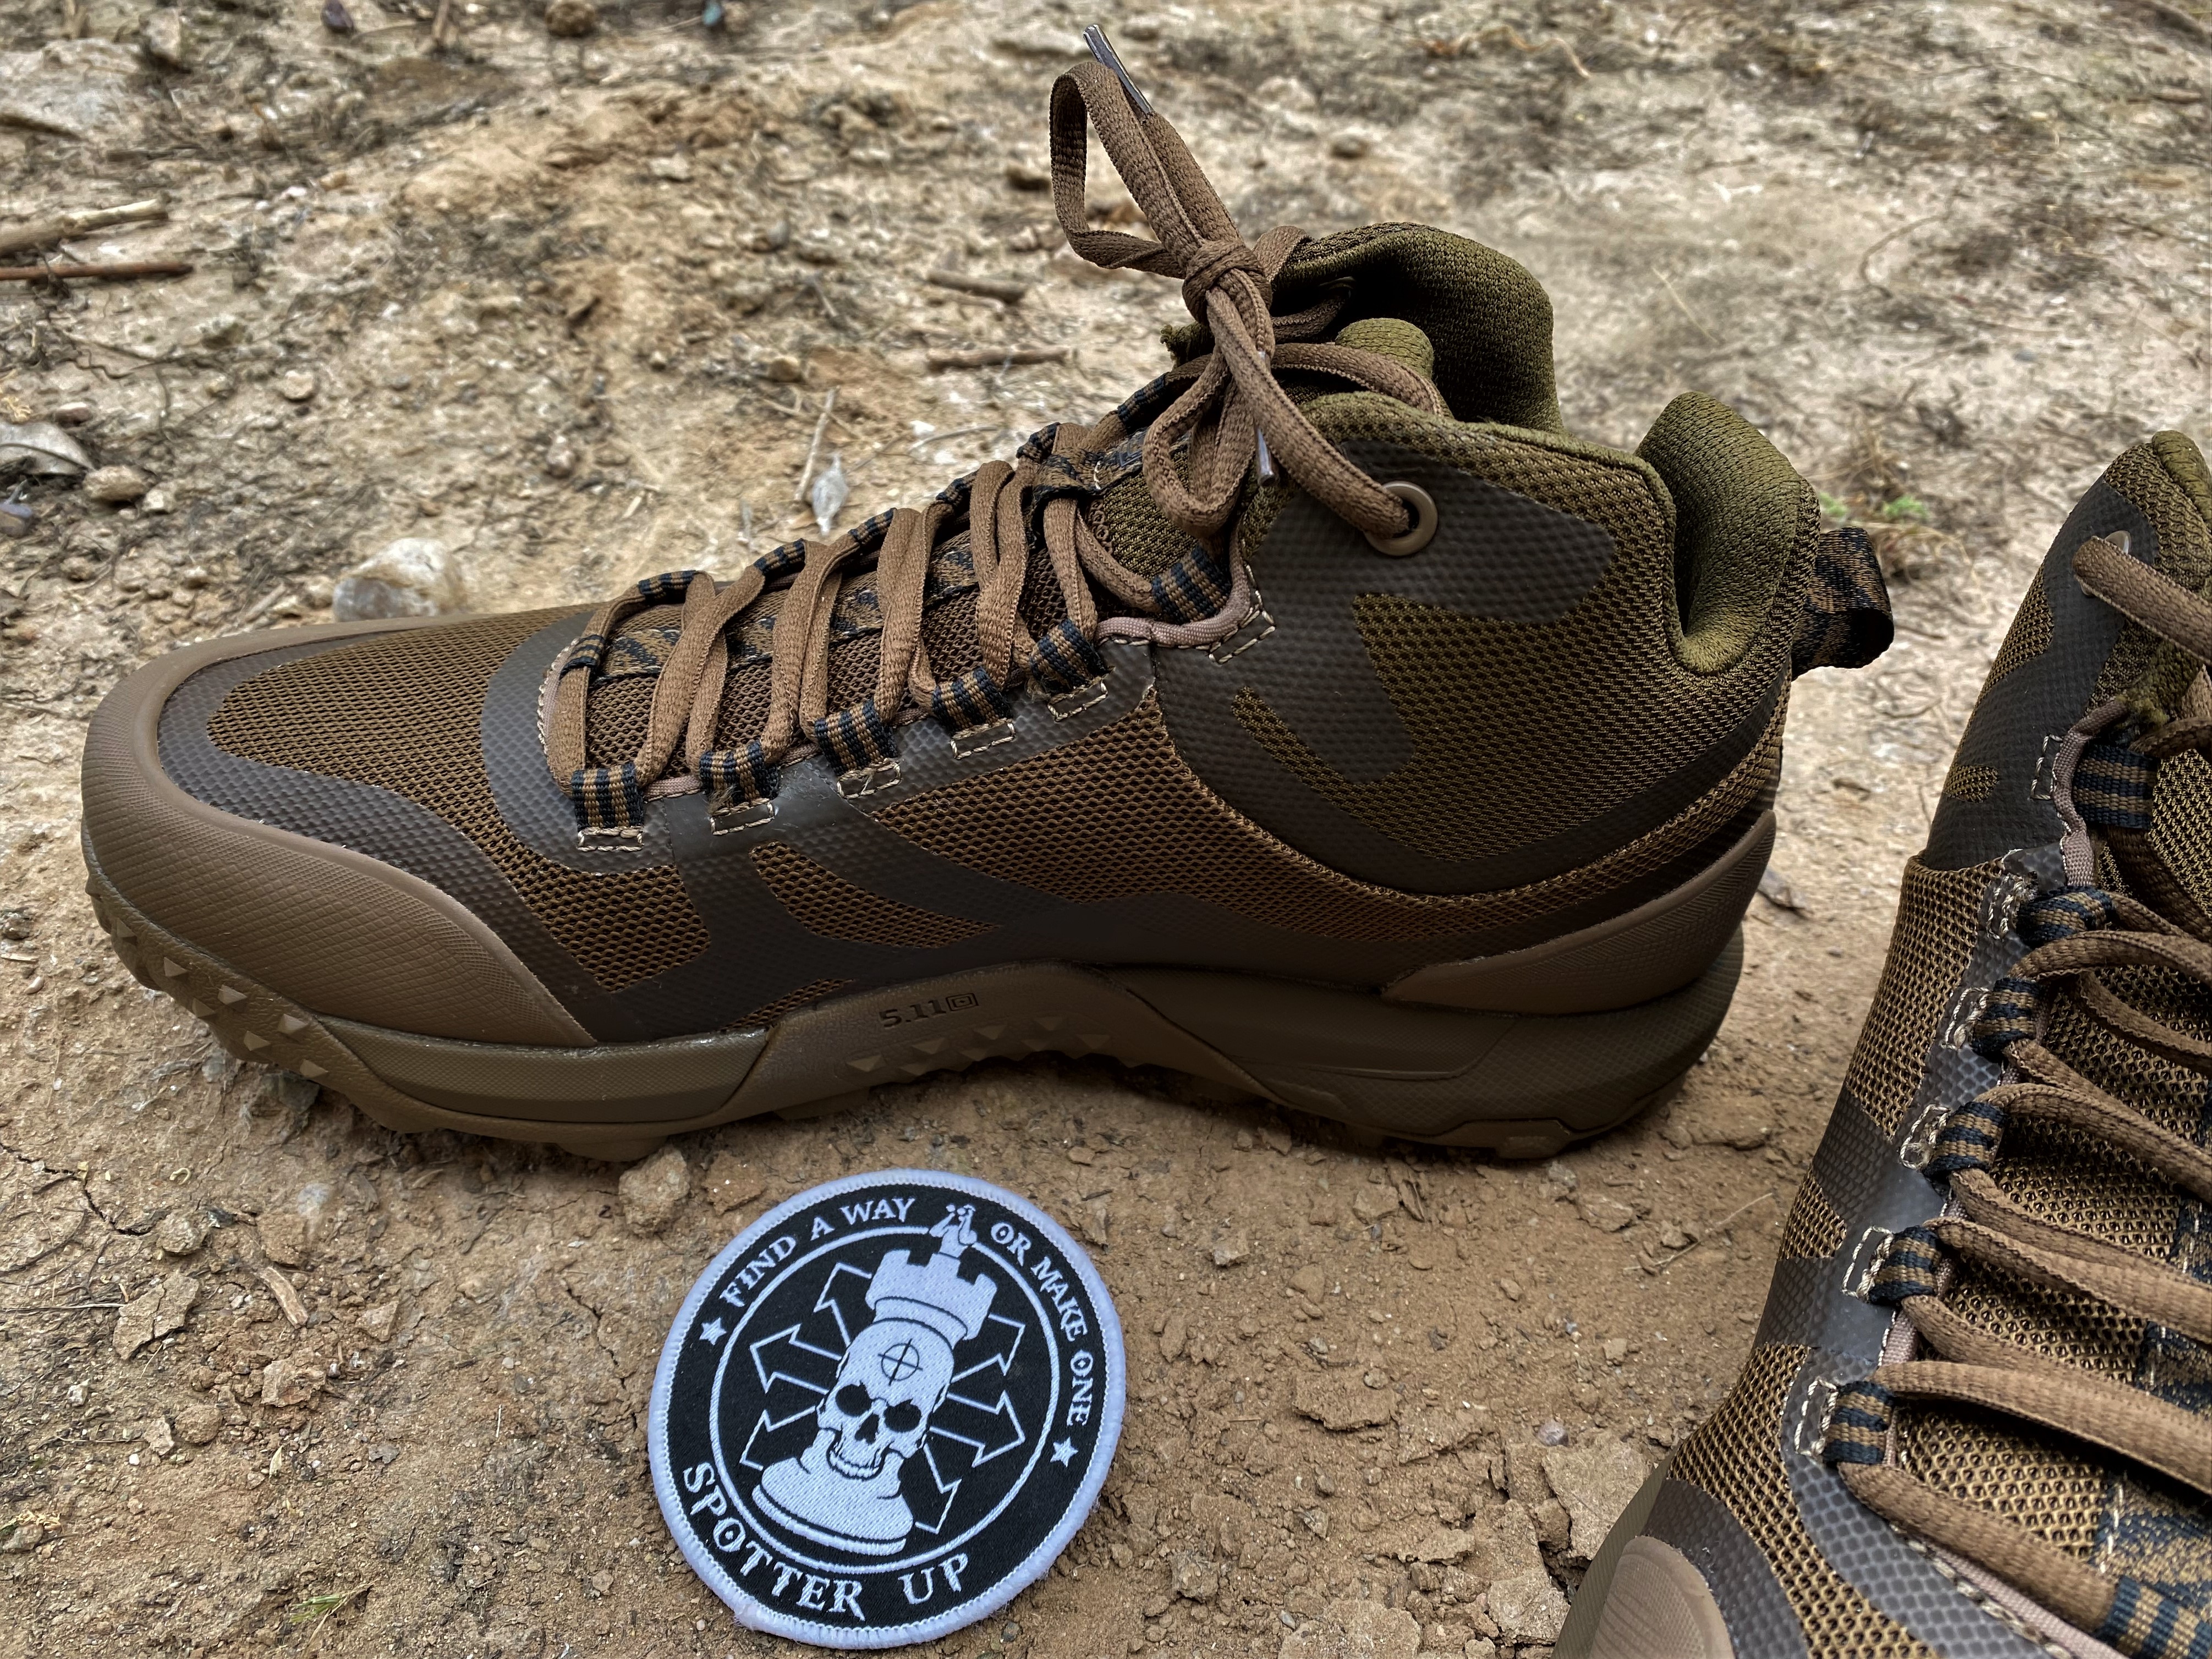 5.11® A/T™ Mid Boot